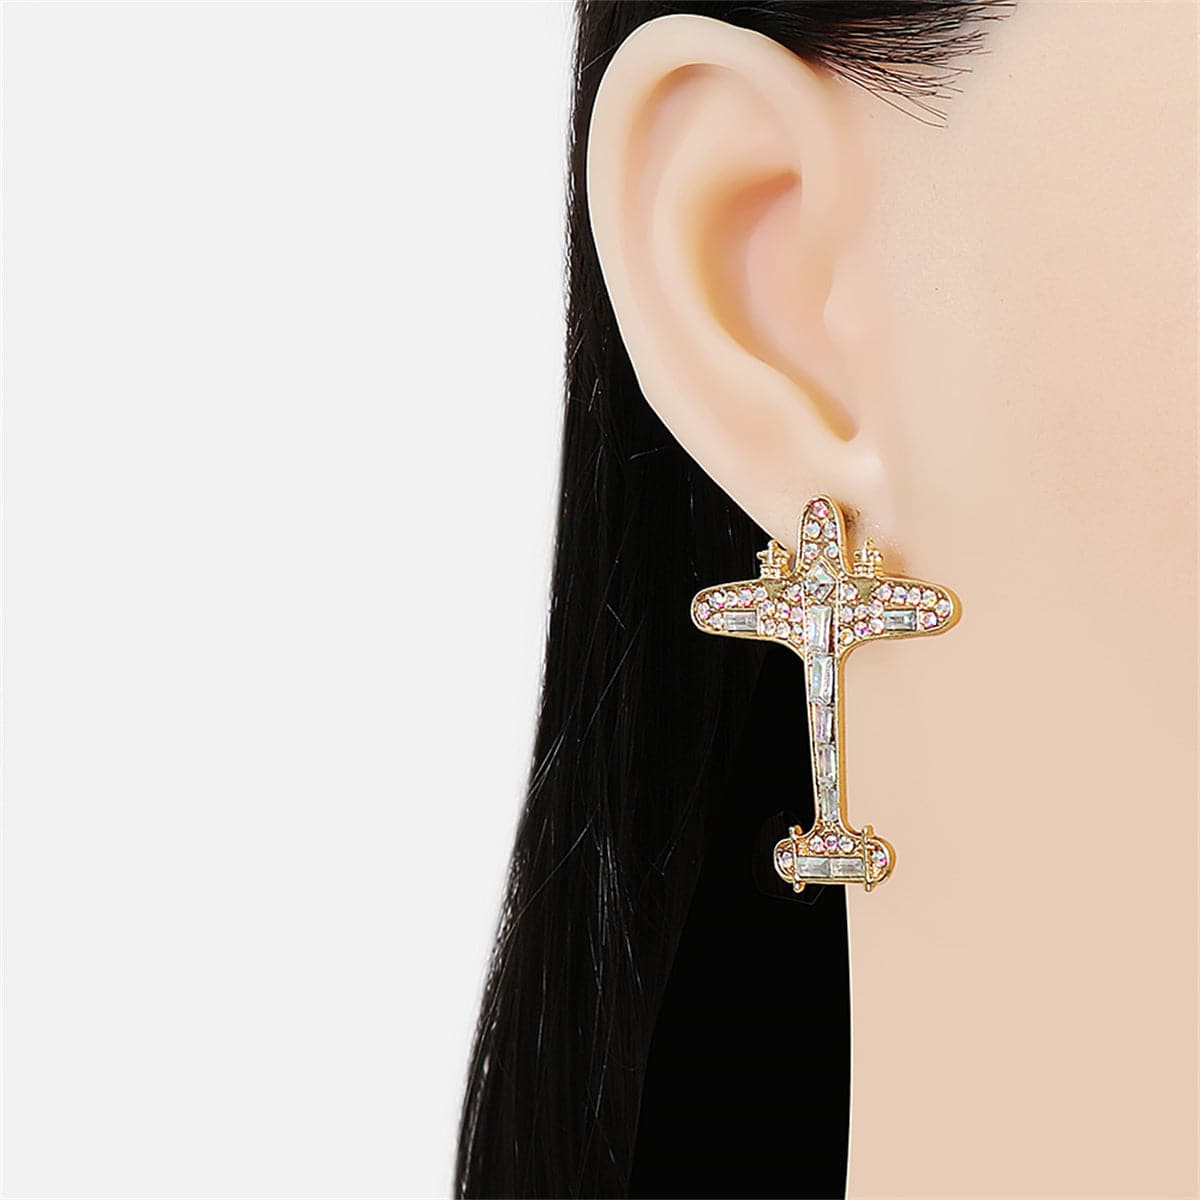 Cubic Zirconia & Crystal 18K Gold-Plated Airplane Drop Earrings